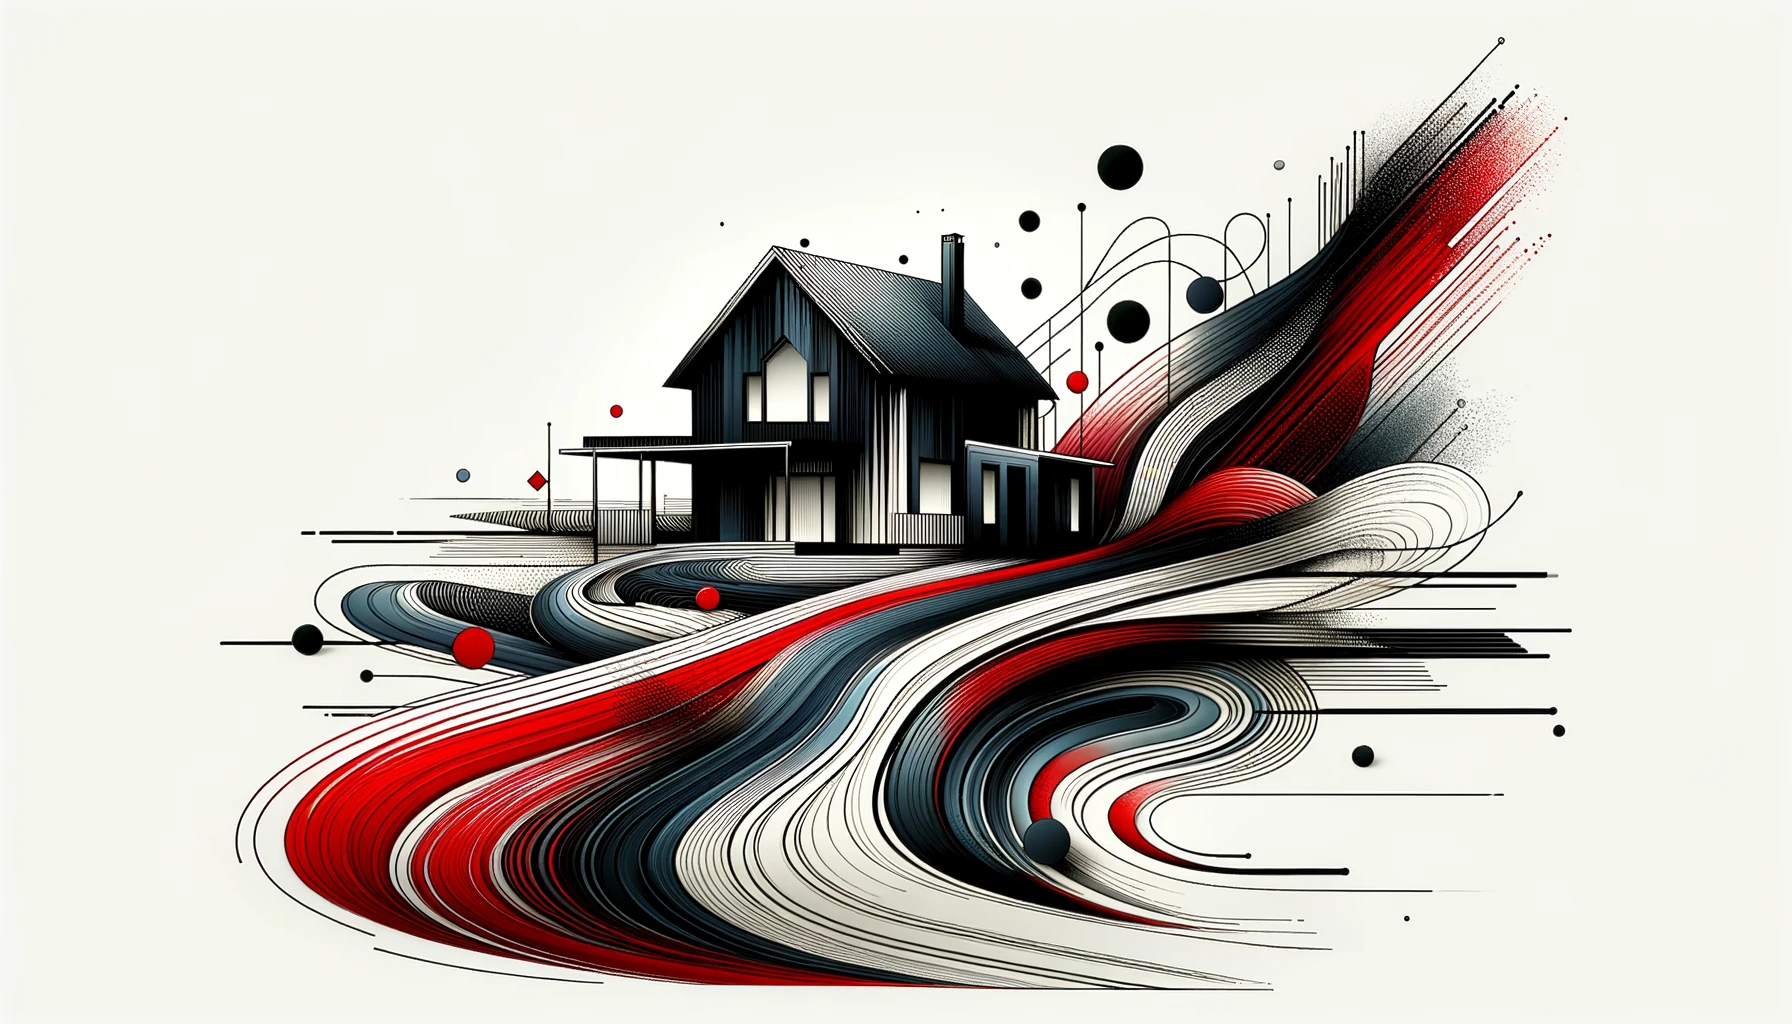 Stylized artistic representation of houses with acreage land for sale, featuring a prominent house amidst abstract, swirling patterns of black, red, and white lines, conveying a sense of spaciousness and movement.